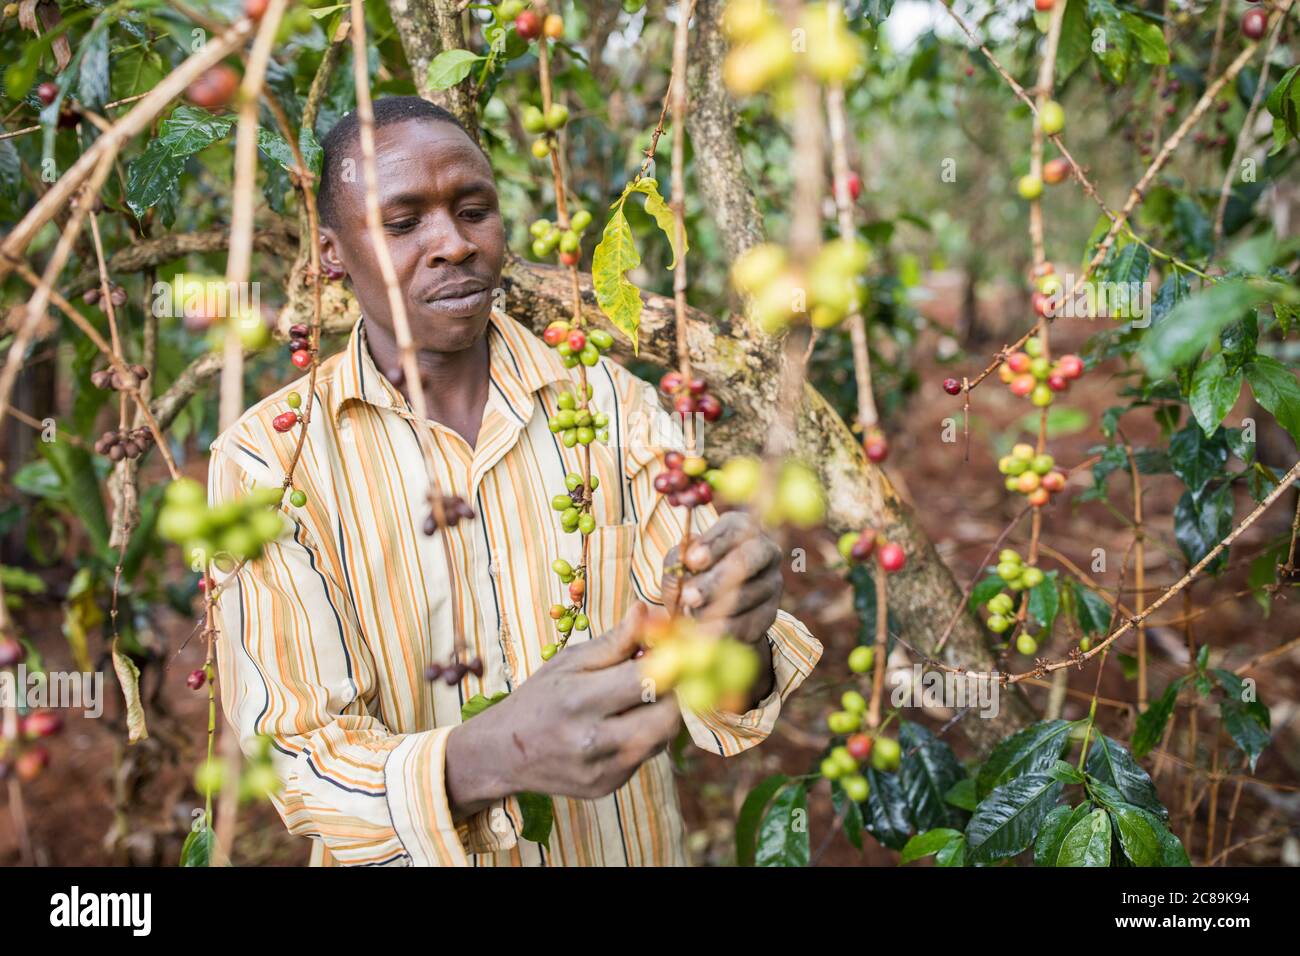 Male coffee grower harvesting fresh coffee cherries on a farm on the foothills of Uganda's Mount Elgon, East Africa. Stock Photo